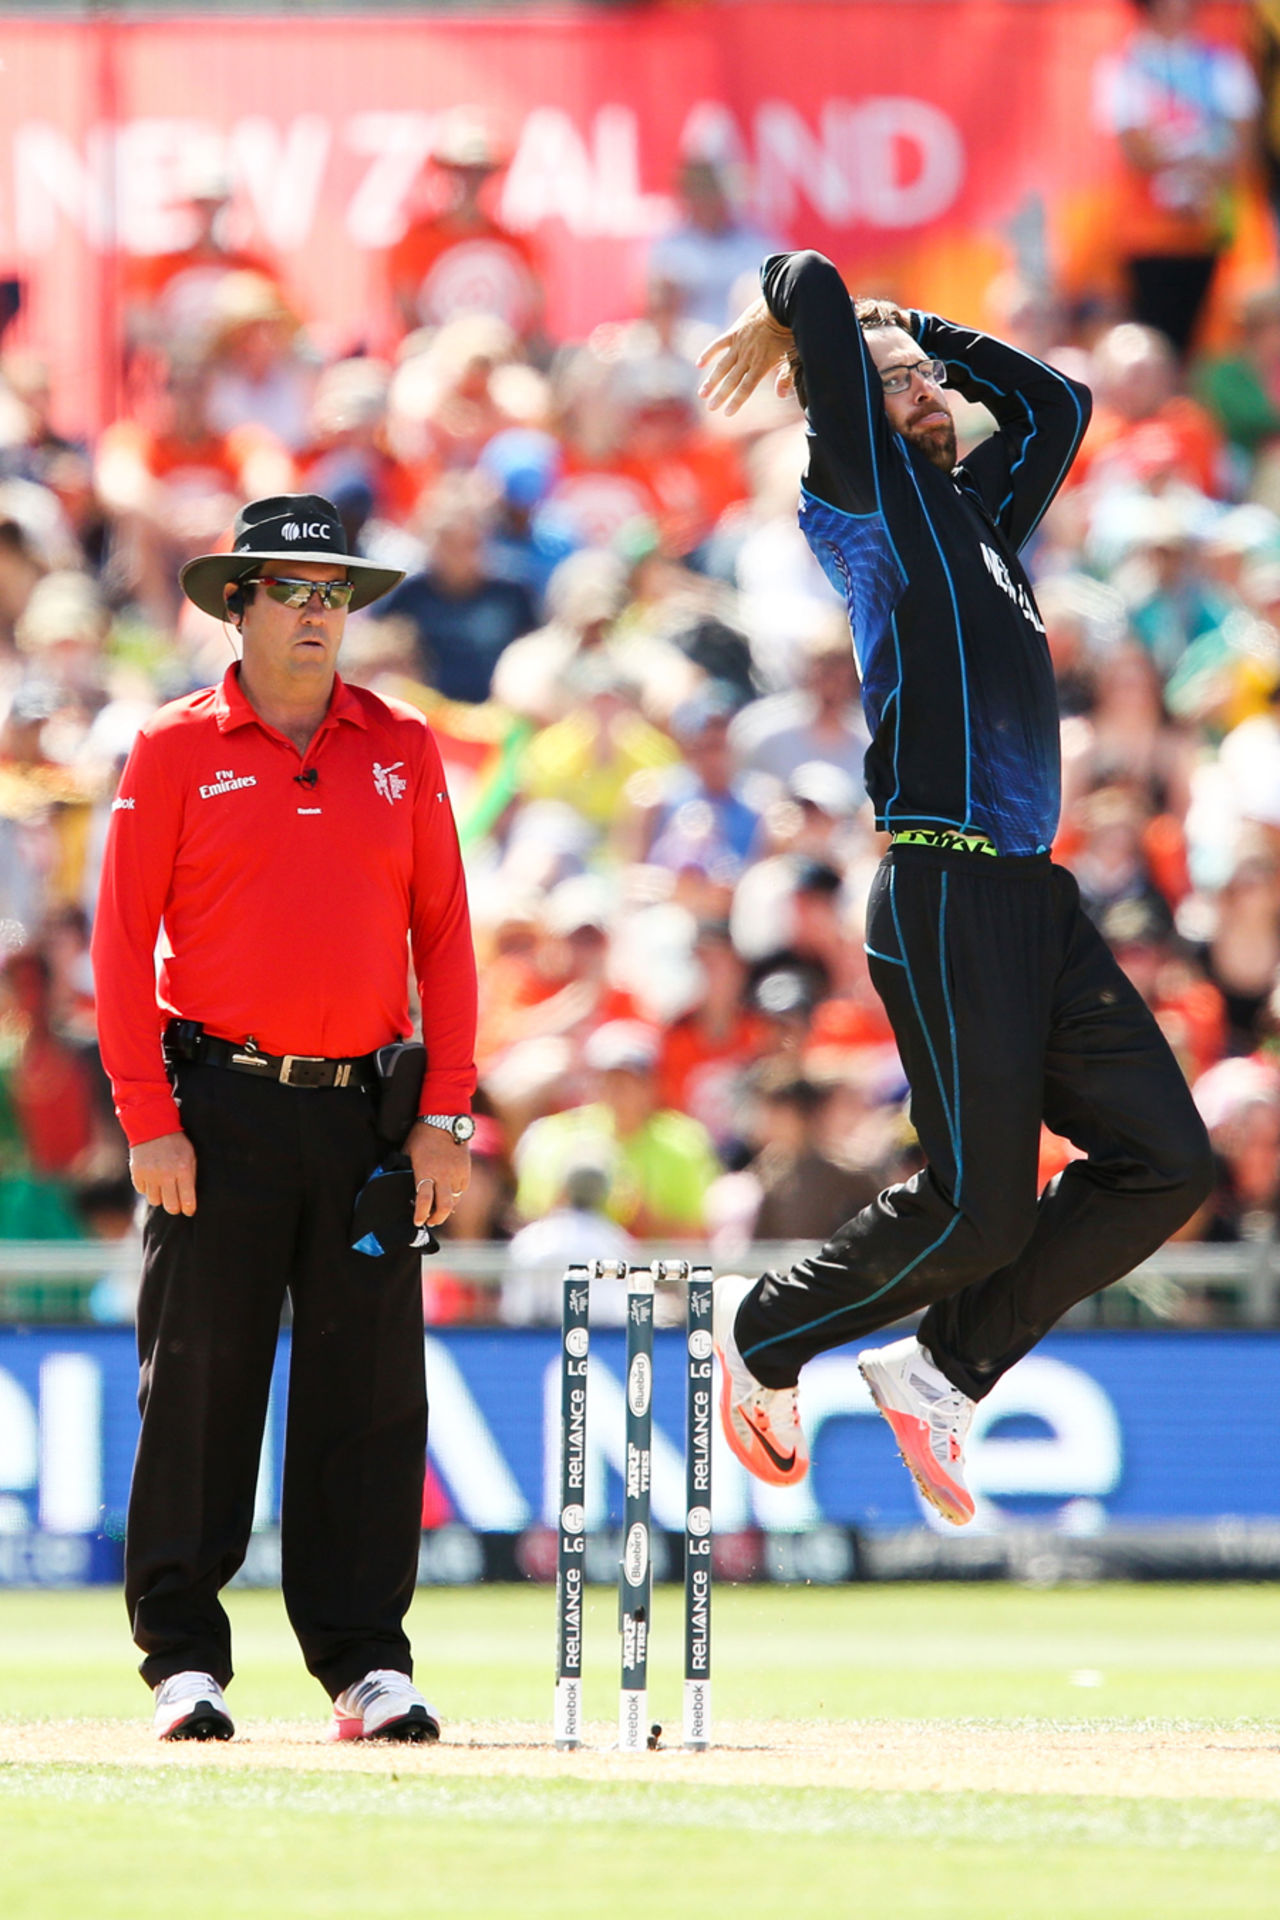 Daniel Vettori winds up to deliver, New Zealand v Afghanistan, World Cup 2015, Group A, Napier, March 8, 2015